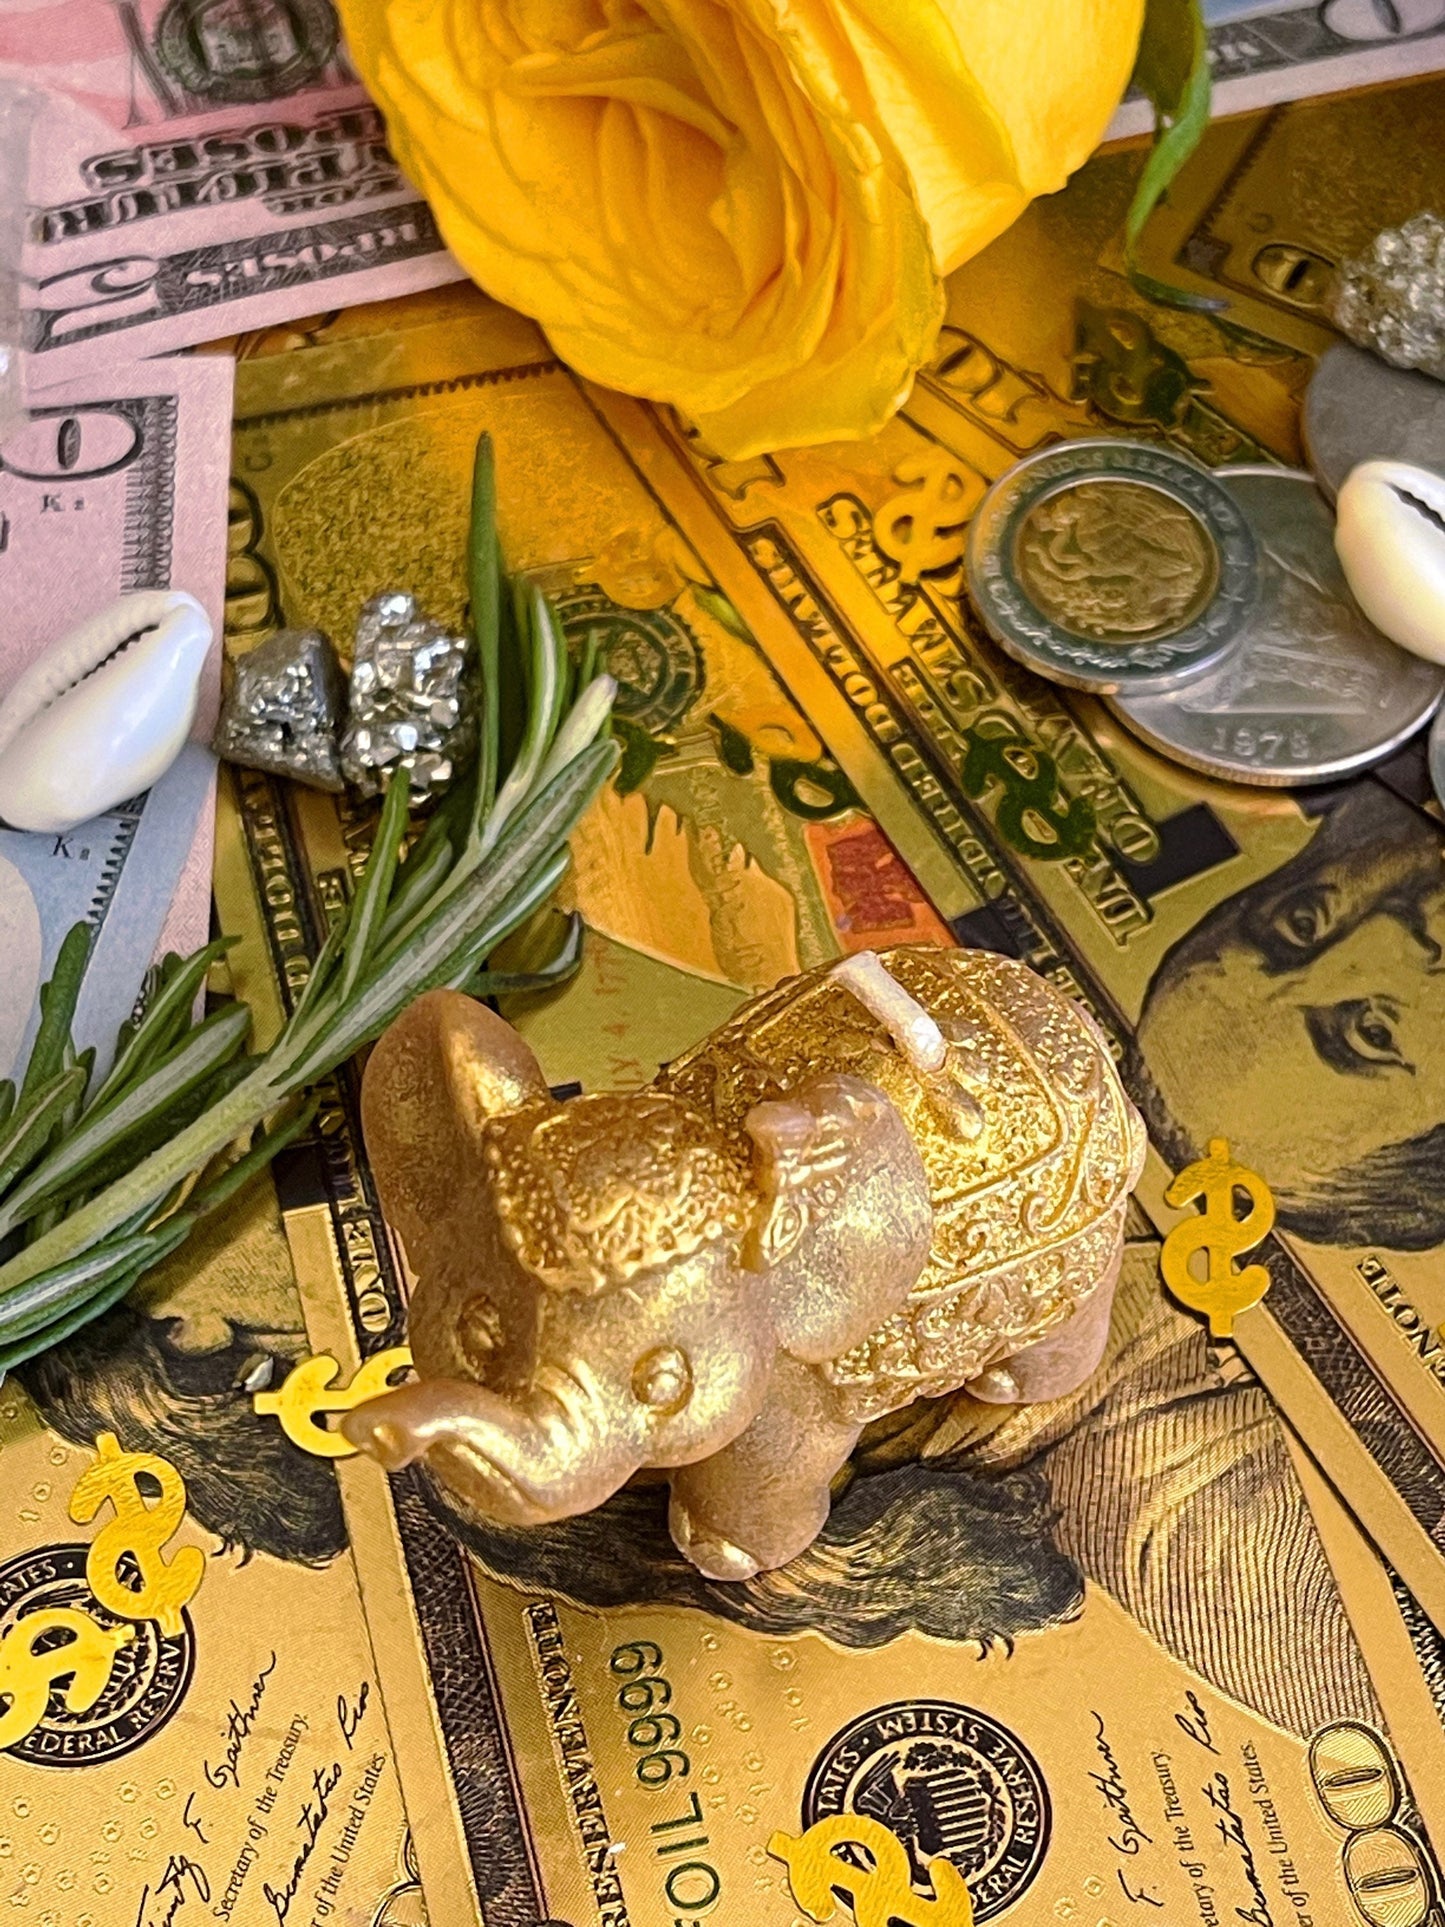 Elephant Candle + Luck + Spirit Guides